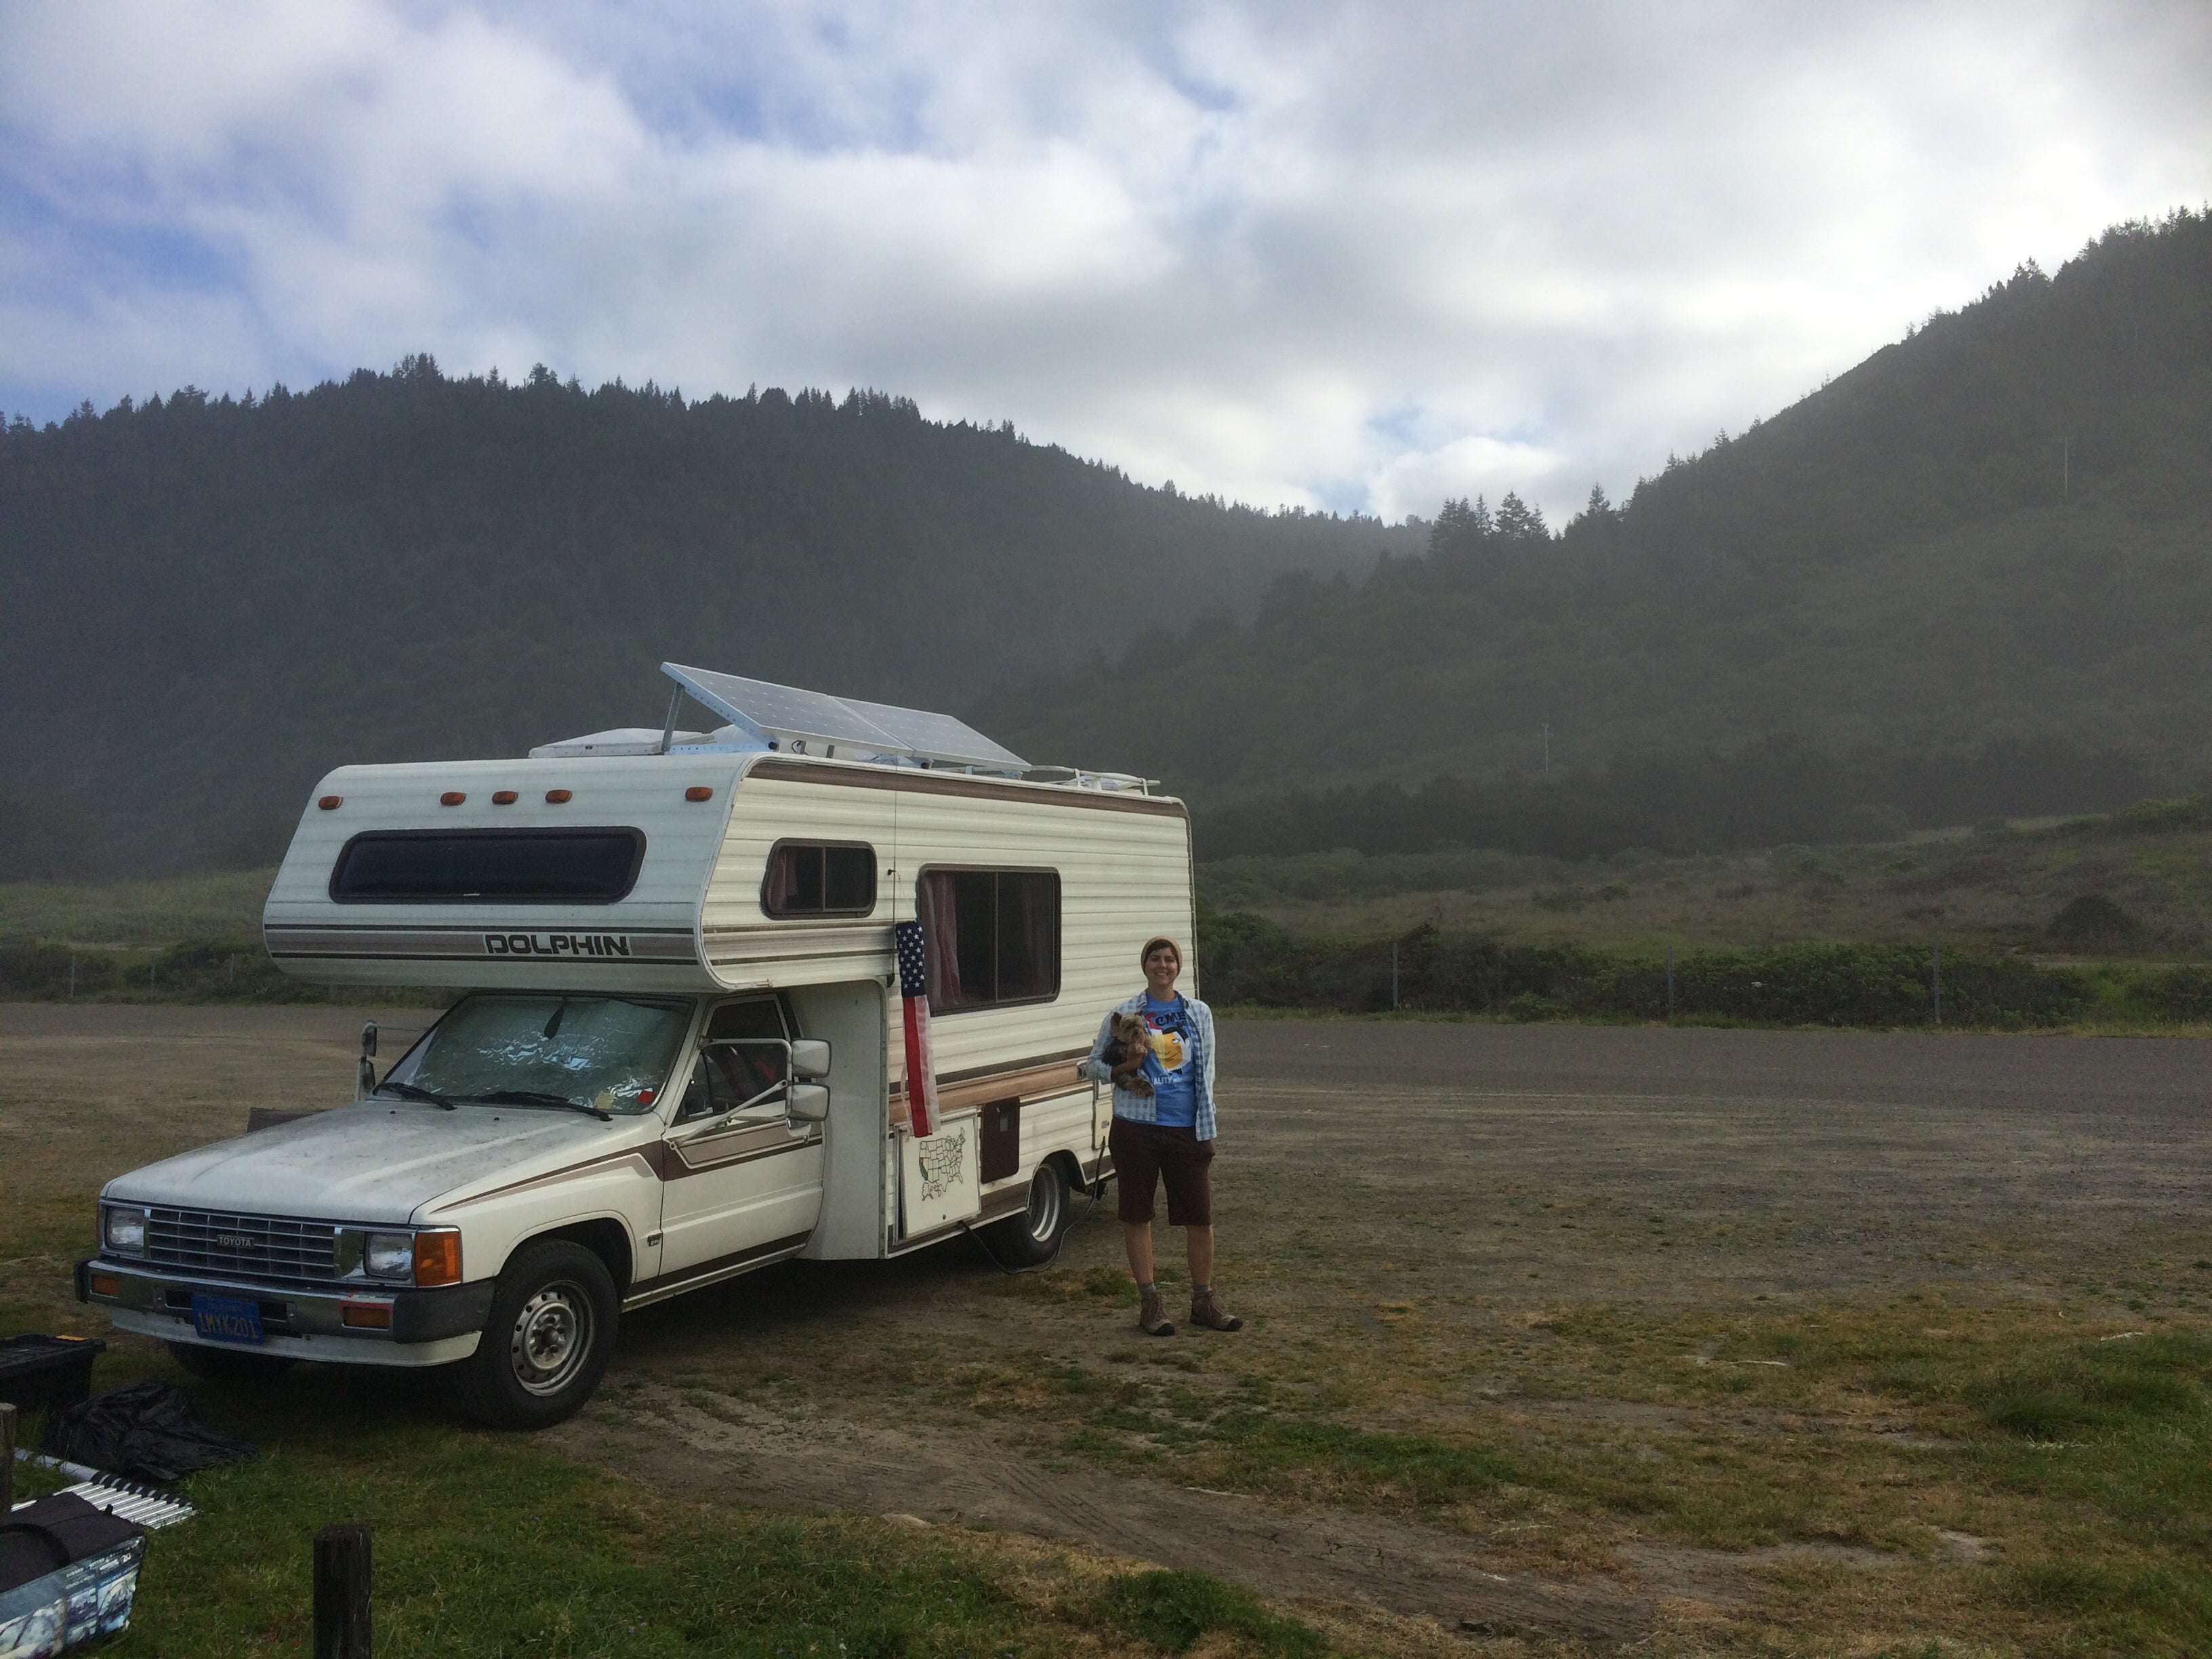 Camper submitted image from Westport Union Landing State Beach — Westport-Union Landing State Beach - 4